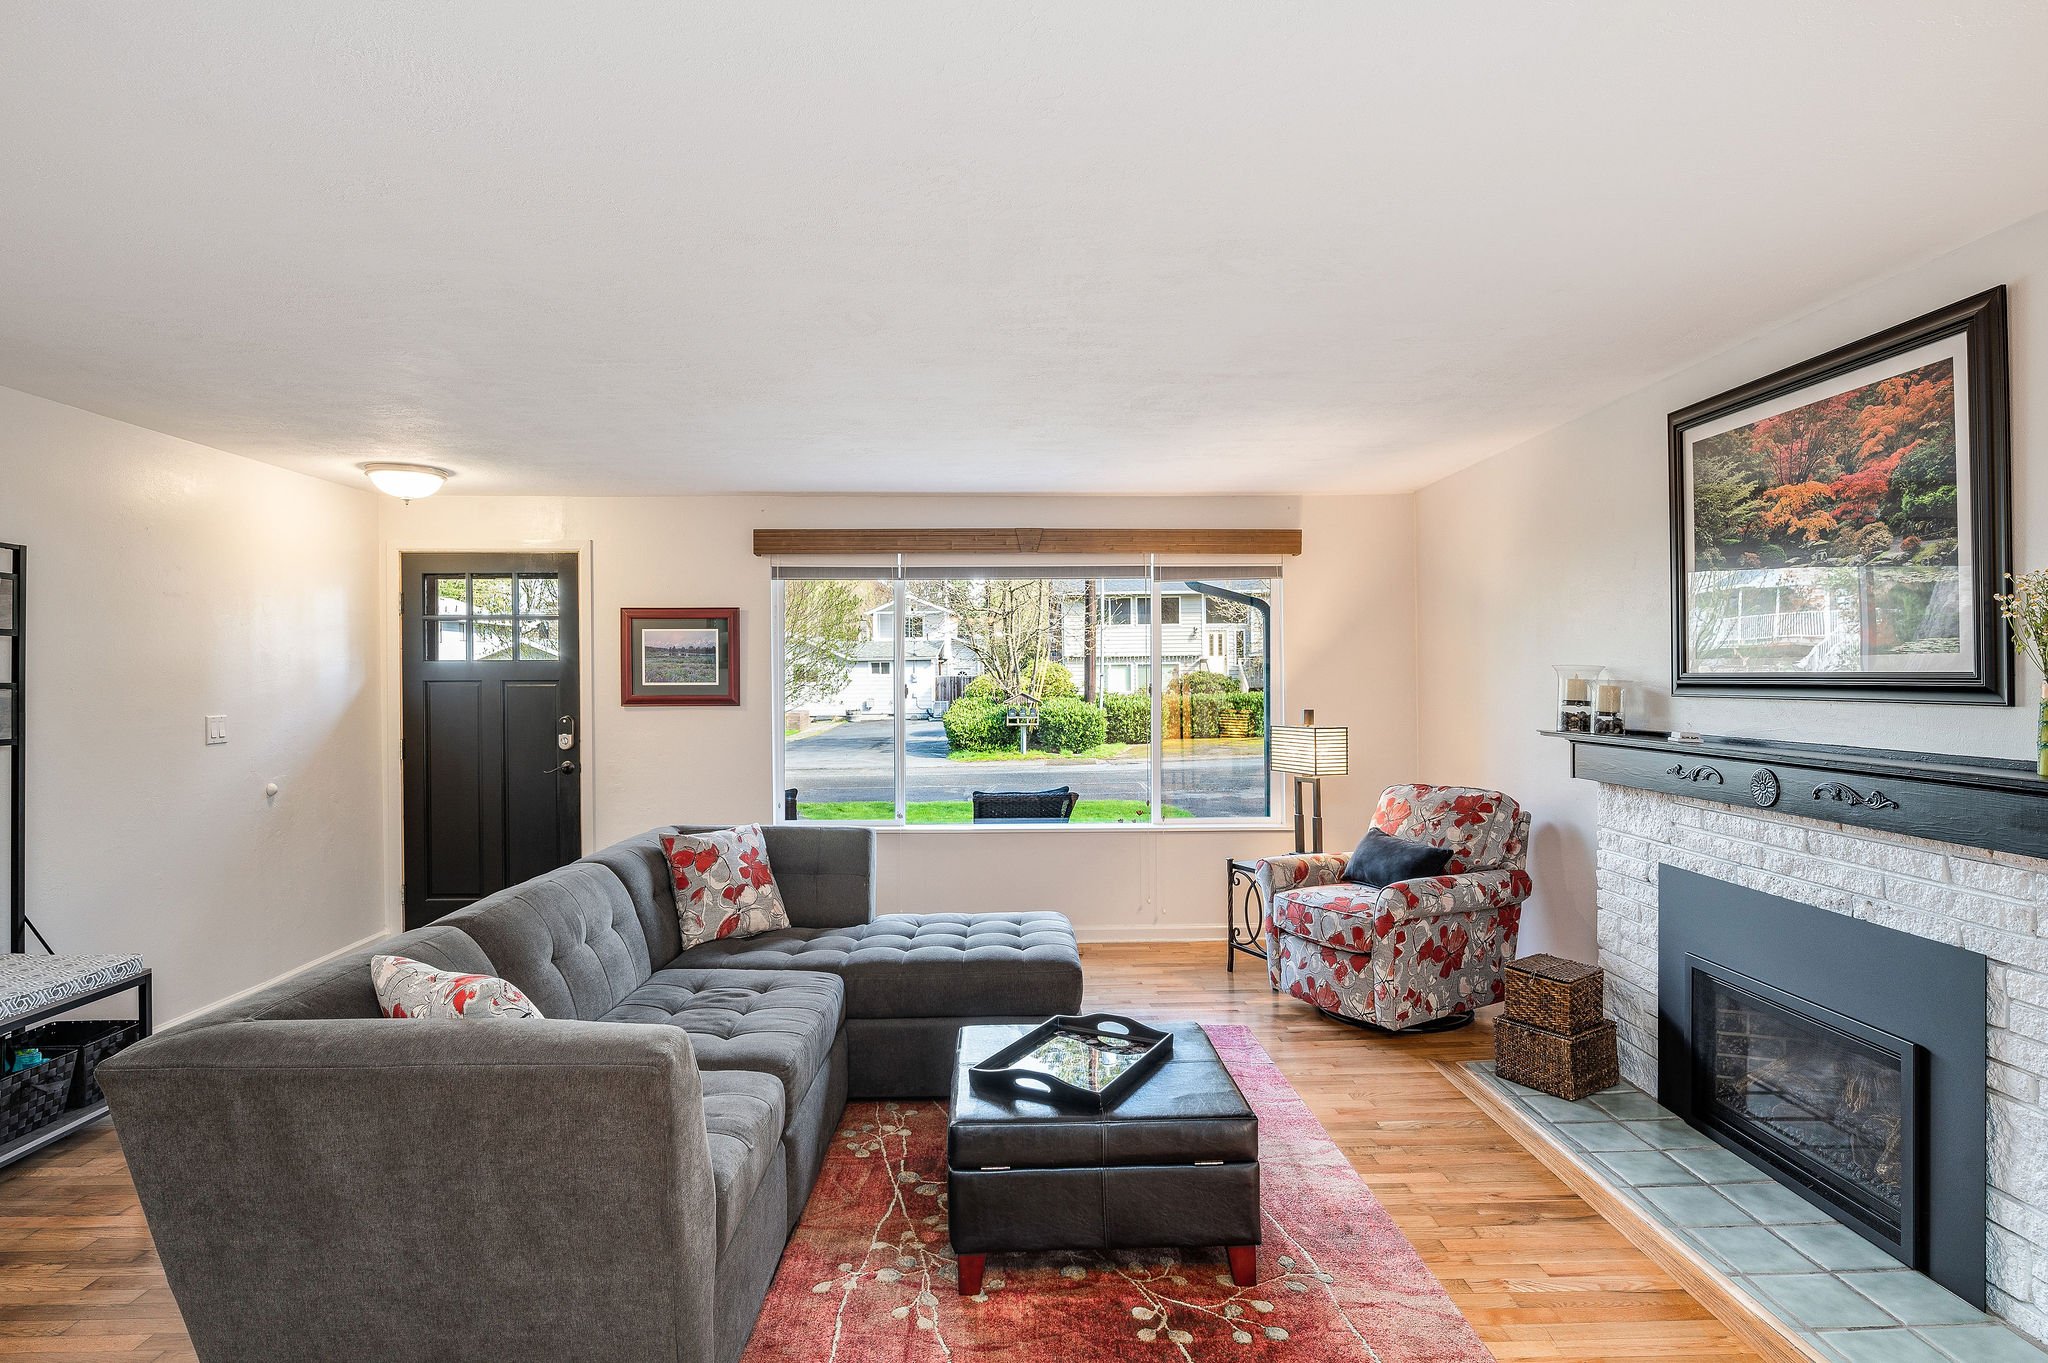 Enter into the bright and open formal living room with a gas fireplace and hardwood floors.